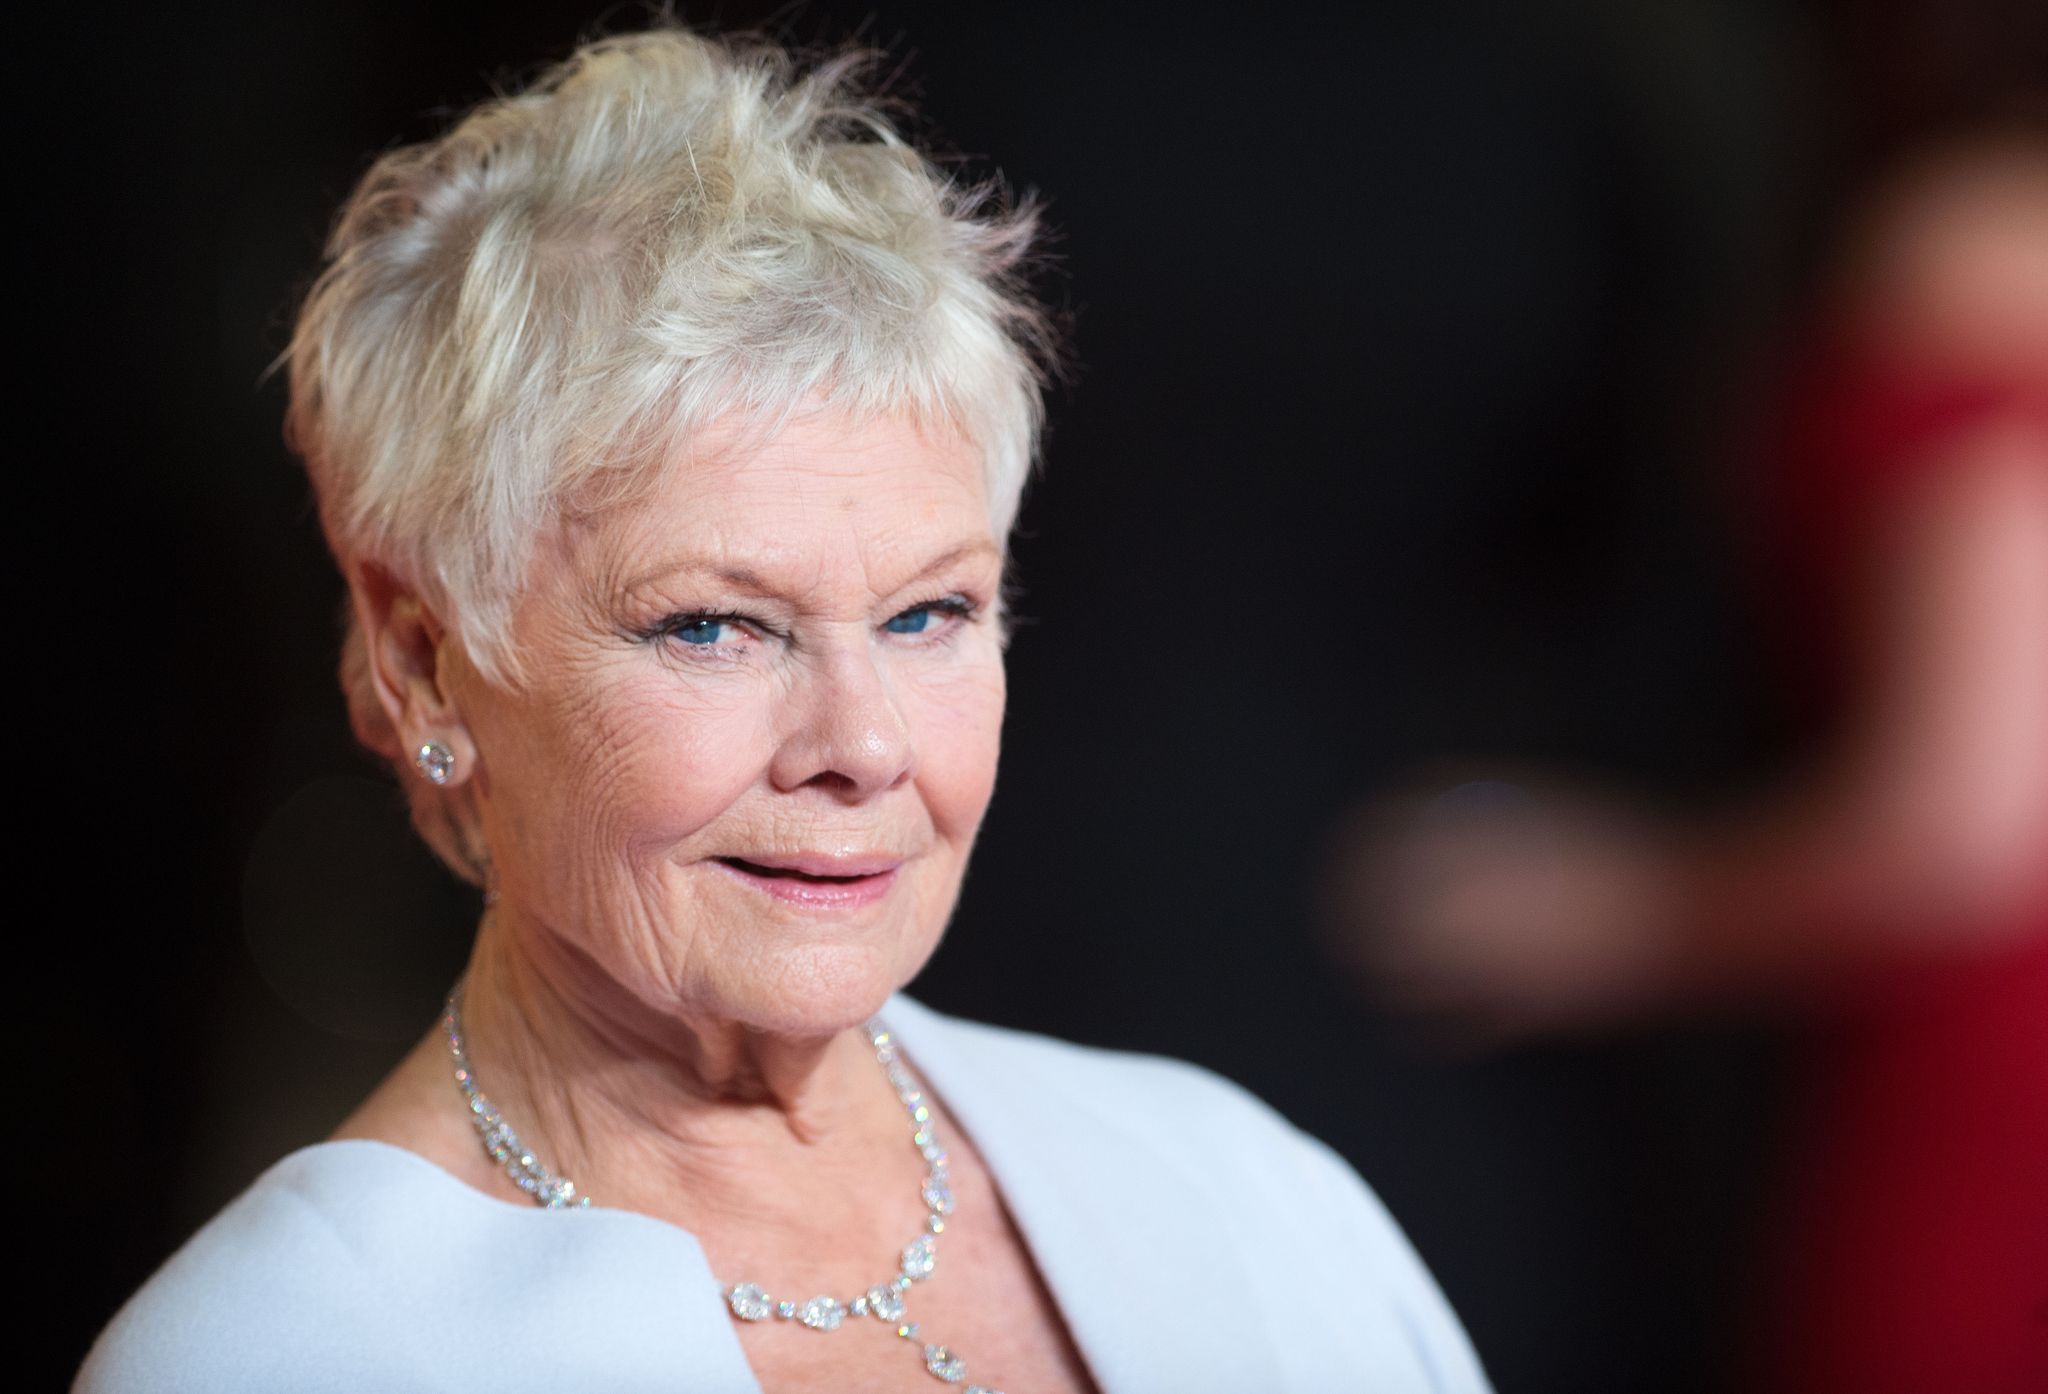  Dame Judi Dench at the Royal World Premiere of "Skyfall" in 2012 in London, England | Source: Getty Images